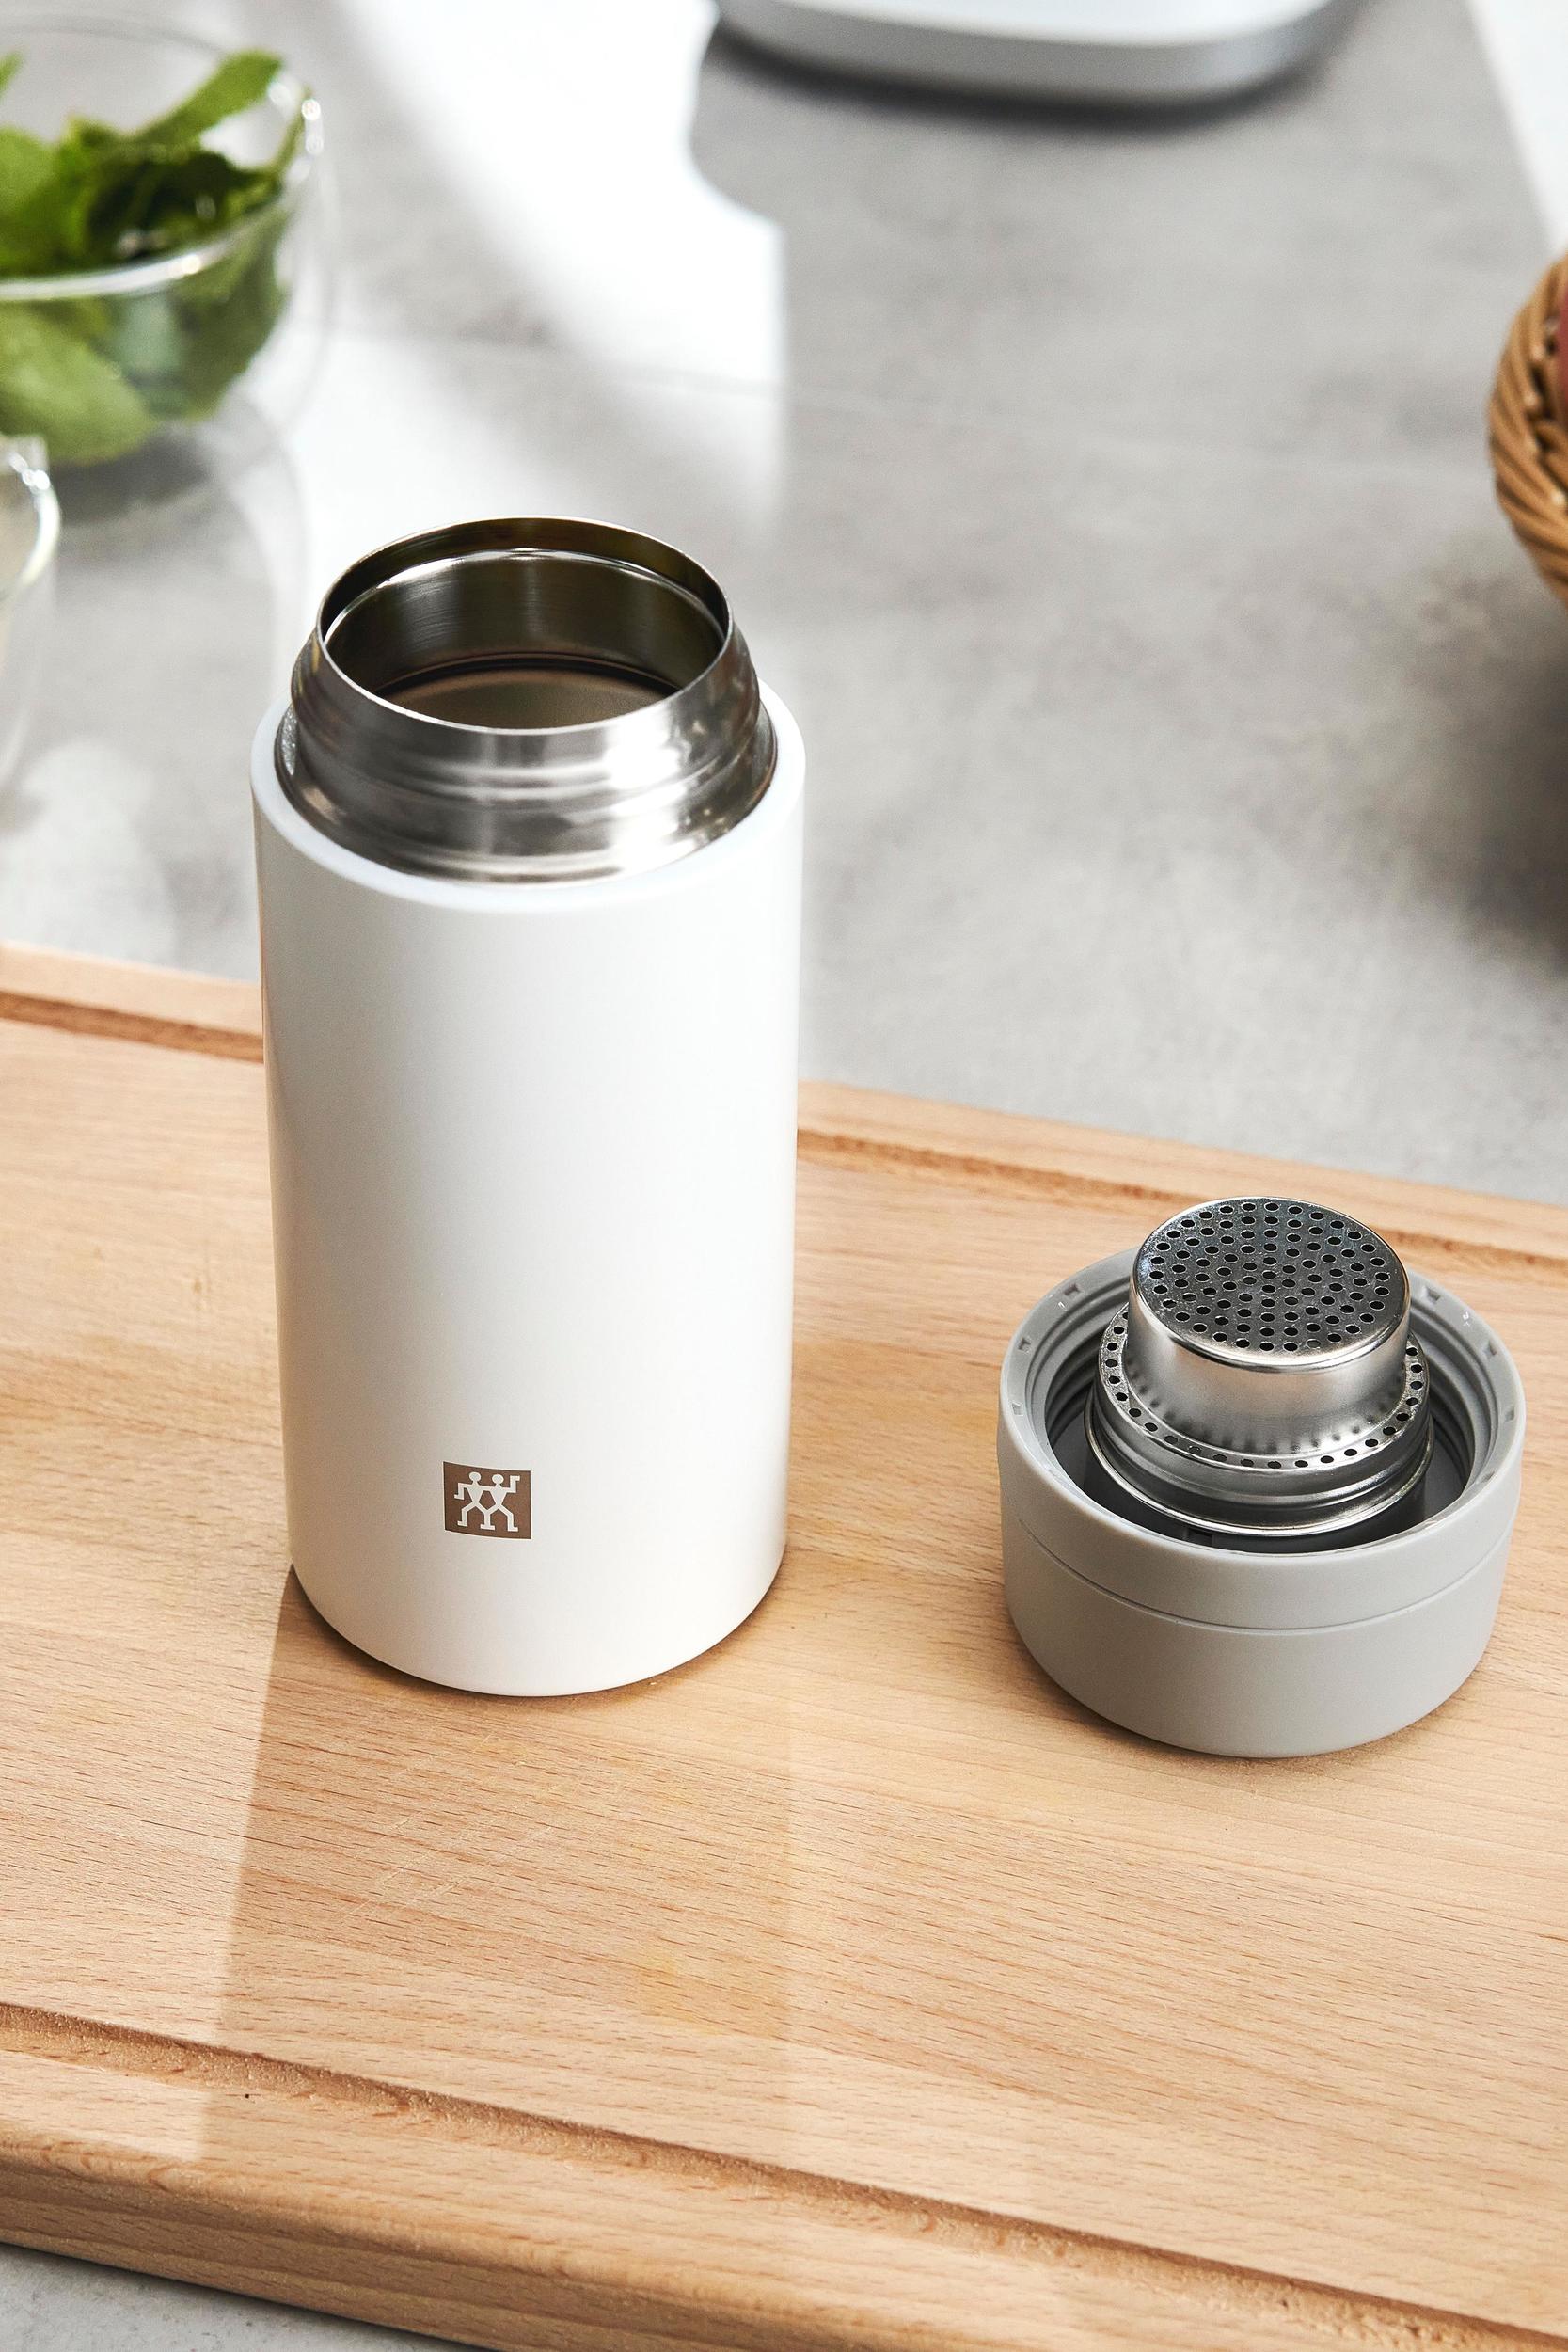 https://3fa-media.com/zwilling/zwilling-thermo-tea-brewing-thermos-420-ml__129995_e55a9b6-s2500x2500.jpg